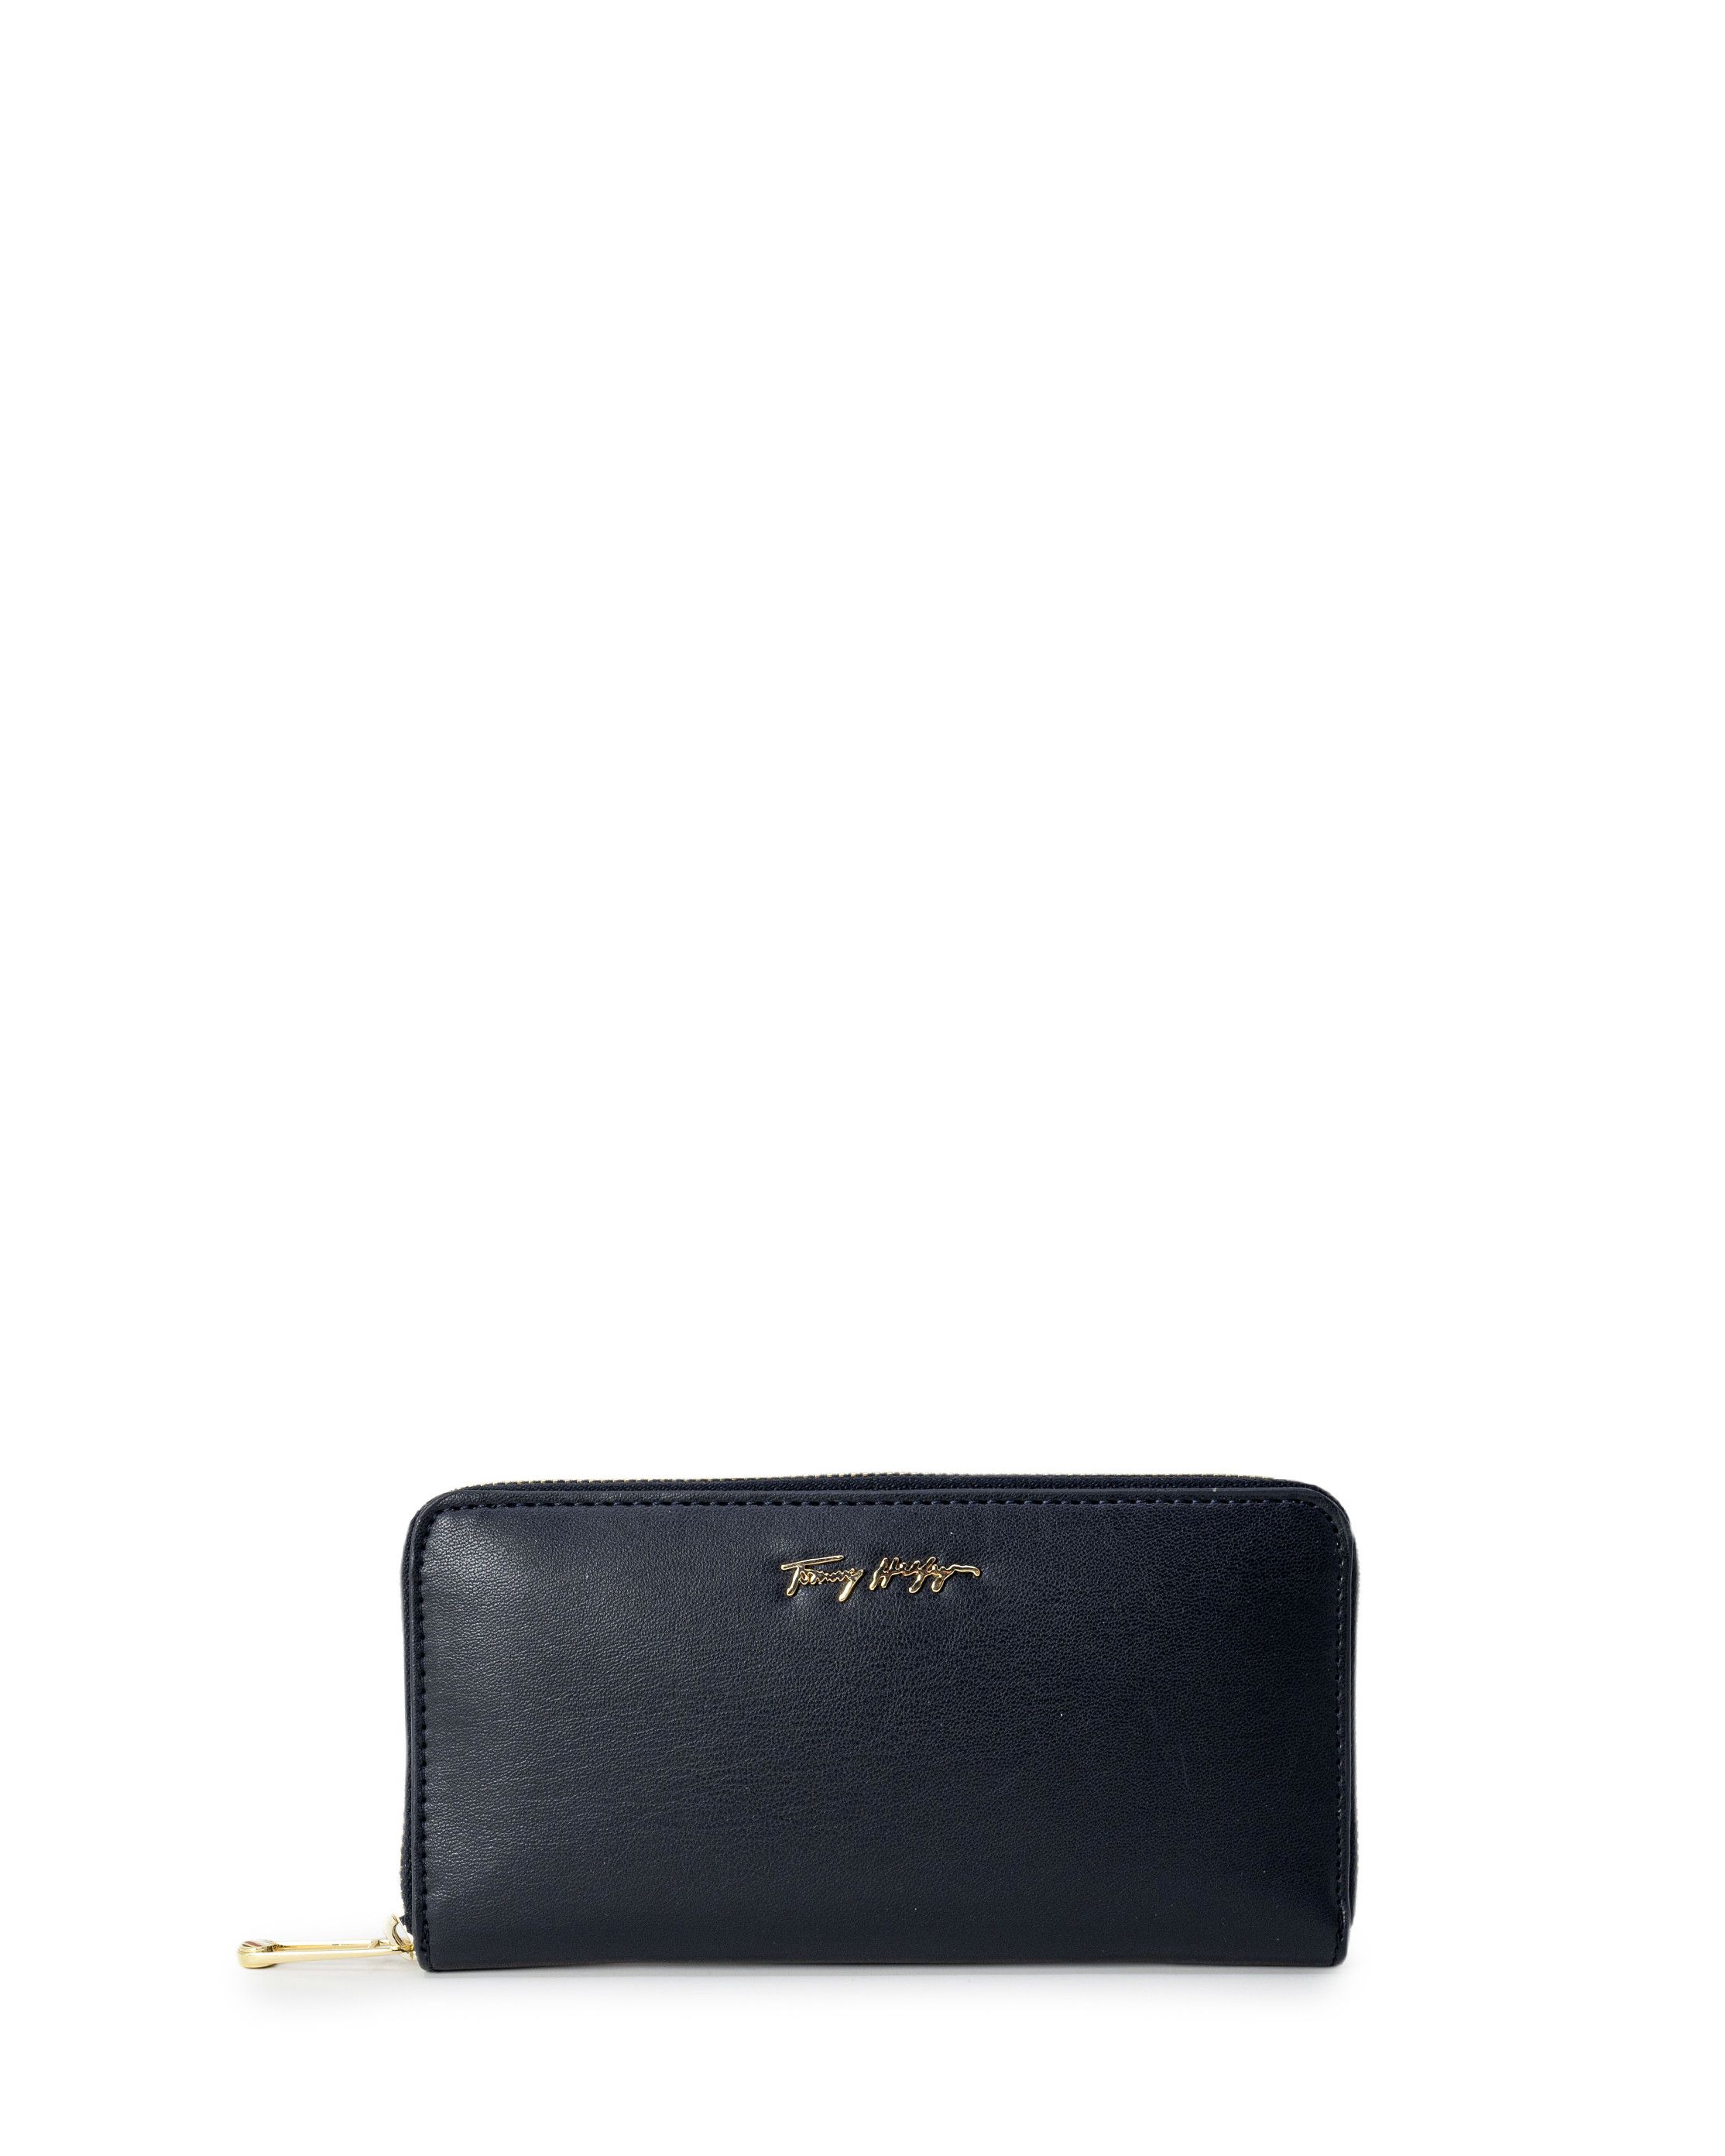 Brand: Tommy Hilfiger Gender: Women Type: Wallets Season: Spring/Summer  PRODUCT DETAIL • Color: black • Pattern: plain • Fastening: with zip • Size (cm): 10.5x17x3.5 cm  COMPOSITION AND MATERIAL • Composition: -100%  polyurethane